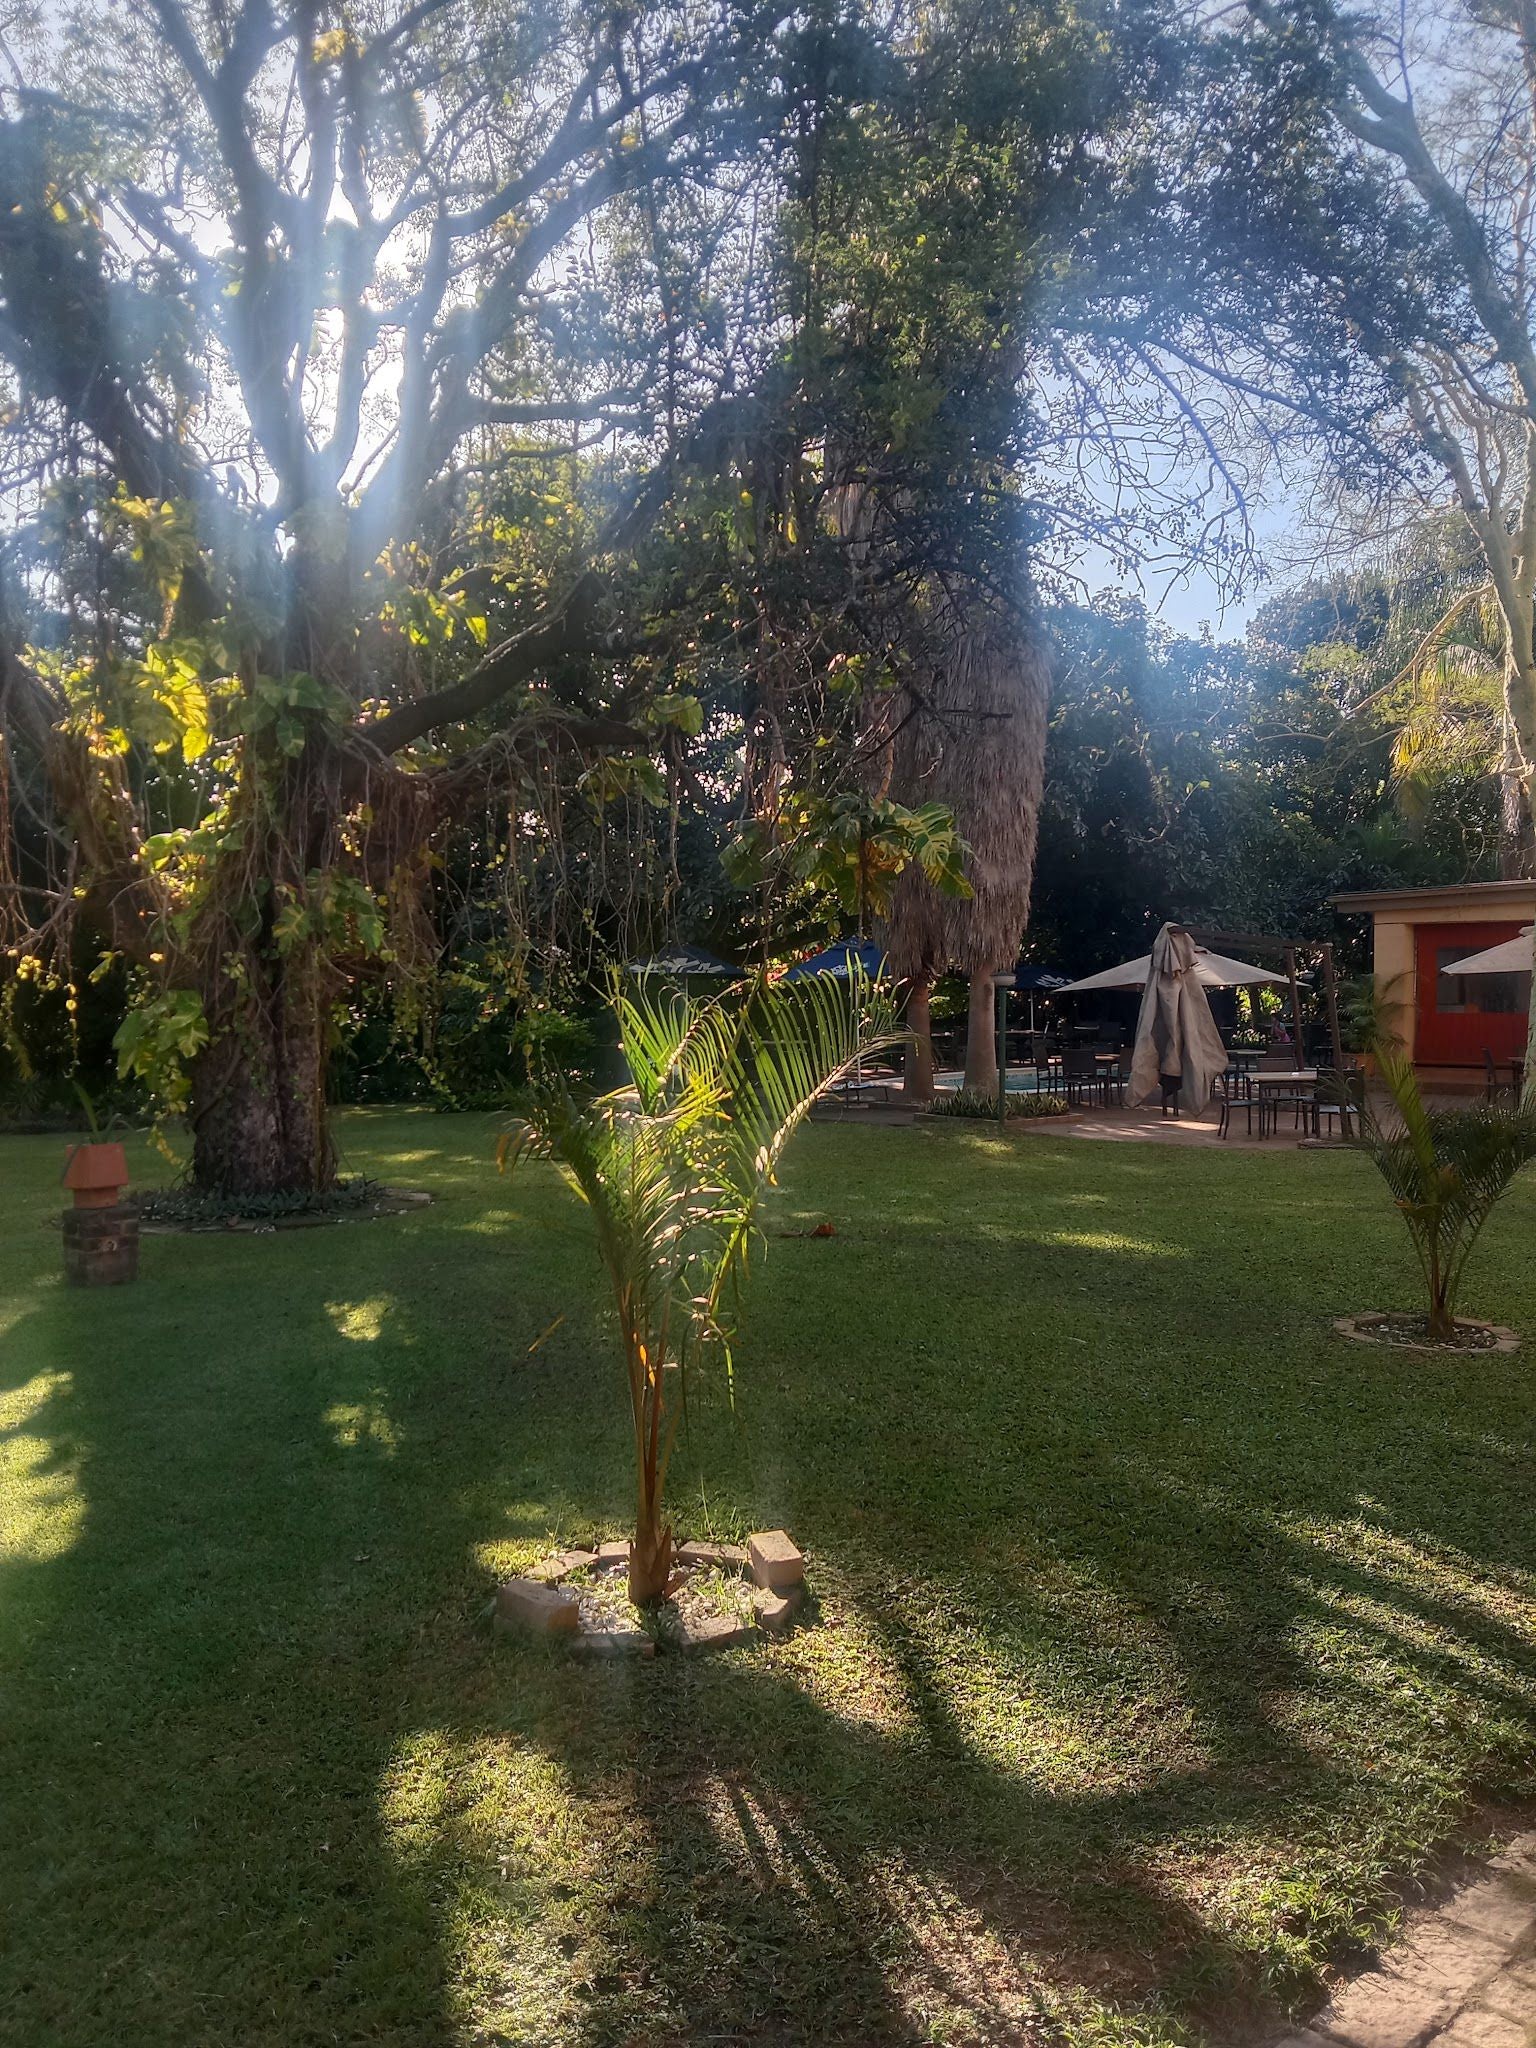 Hotel Numbi And Garden Suites Hazyview Mpumalanga South Africa Palm Tree, Plant, Nature, Wood, Tree, Garden